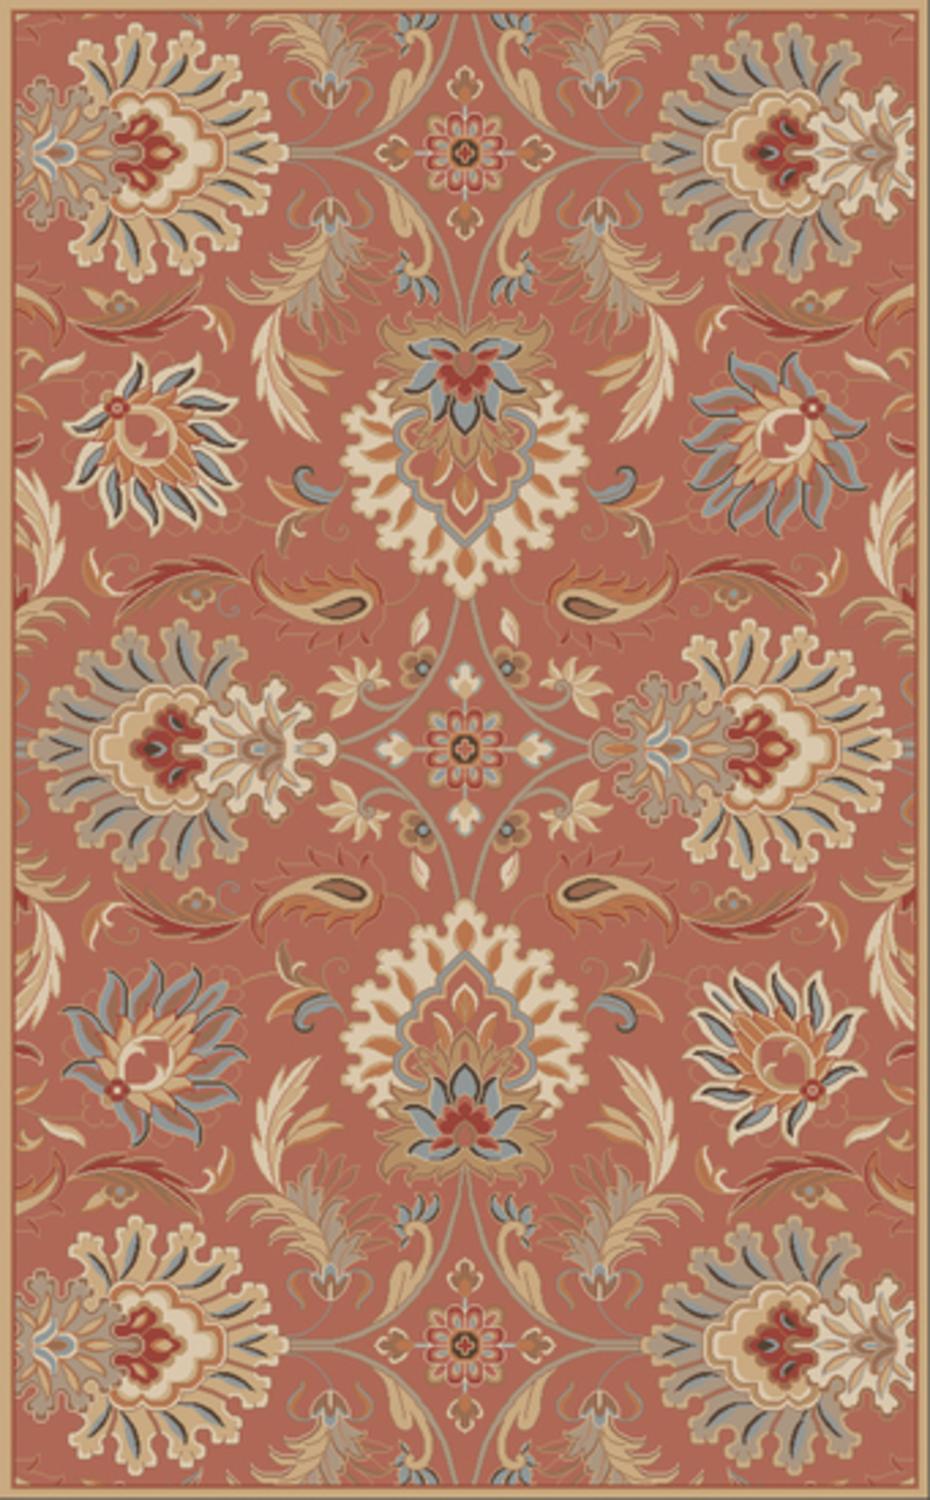 Diva At Home 9.75' x 9.75' Cornelian Red Clay & Beige Hand Tufted Square Wool Area Throw Rug